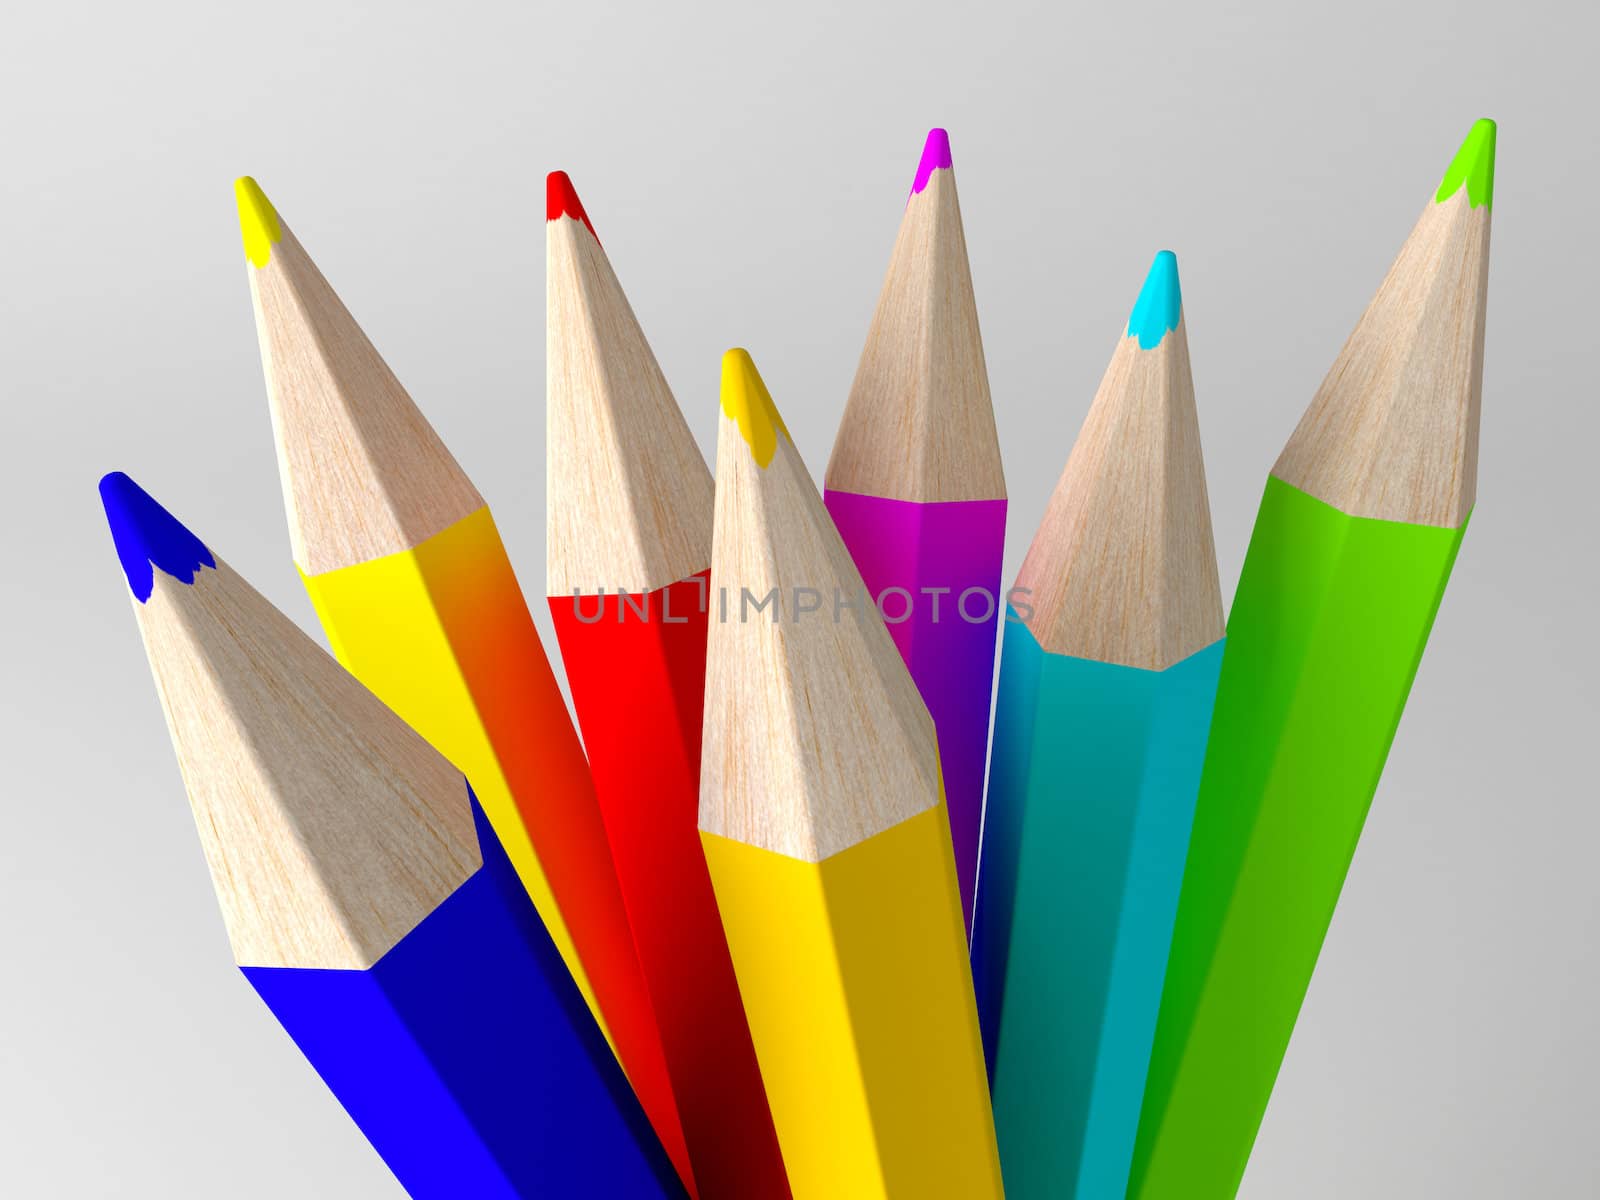 3D render of Pencils painted in different colors on white background.